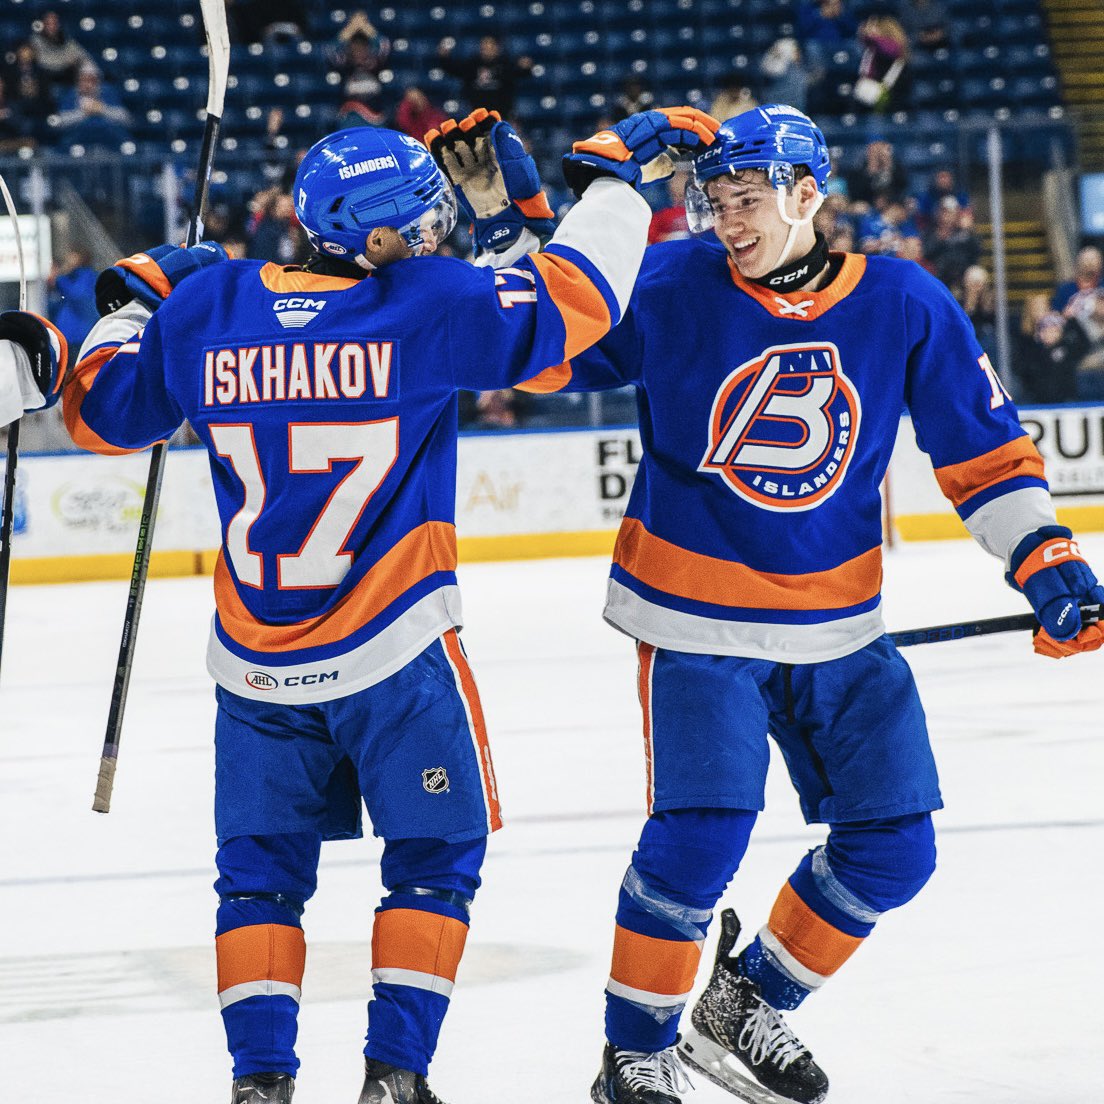 That first NHL call-up feeling ☺️ Congratulations to Ruslan Iskhakov on his first call-up to the @NYIslanders